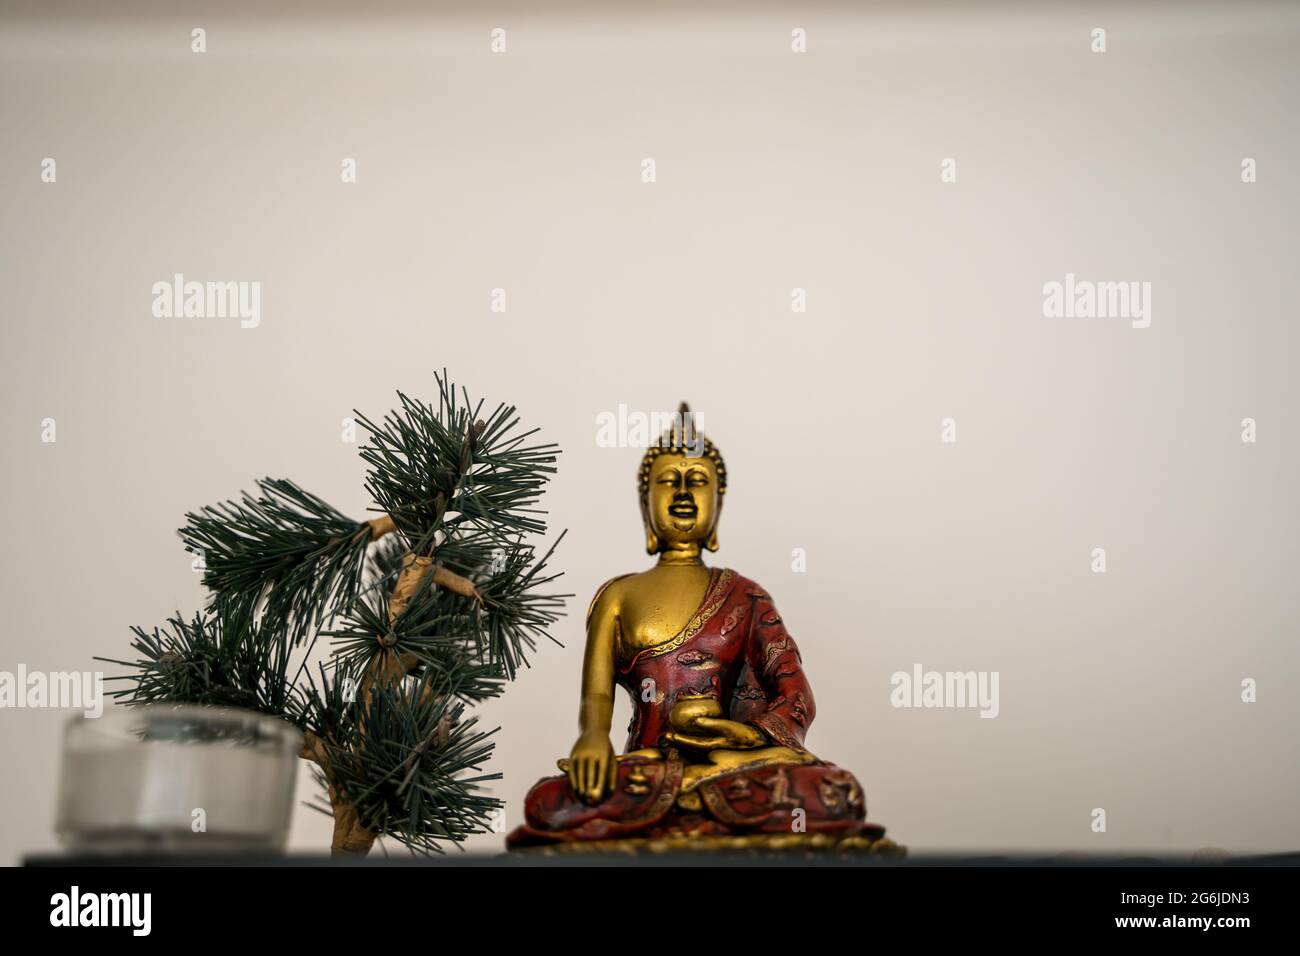 Shiny sitting Buddha posture statue with Kalash translated in Bowl next to plant isolated in white background, copy paste space. Stock Photo